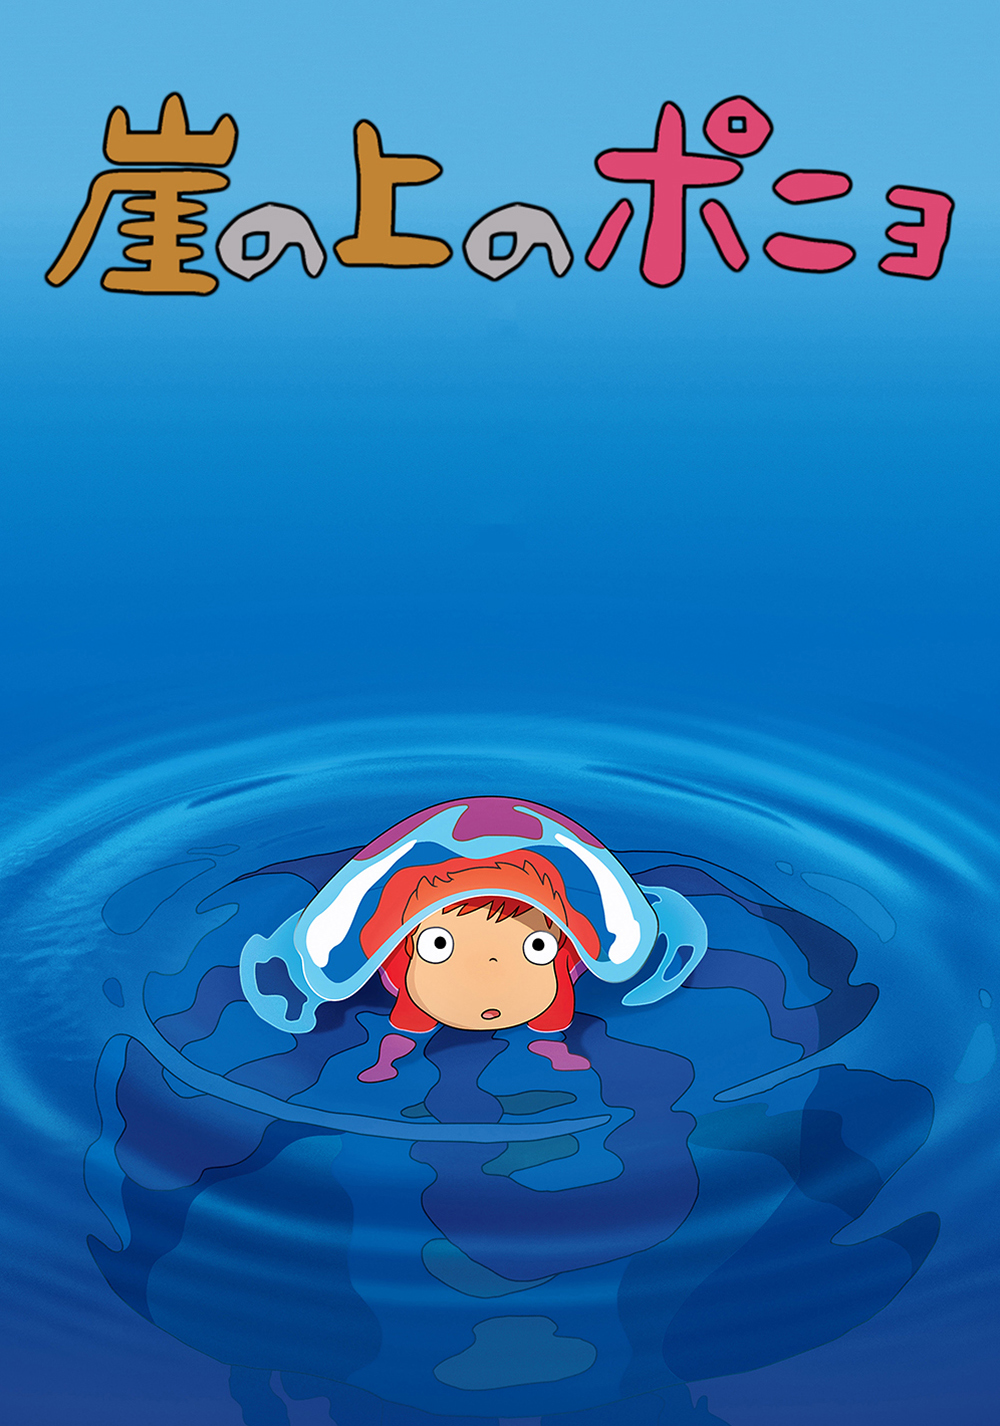 Watch 崖の上のポニョ Ponyo On The Cliff By The Sea 崖の上のポニョ With Original Japanese Voice And Interactive Subtitles